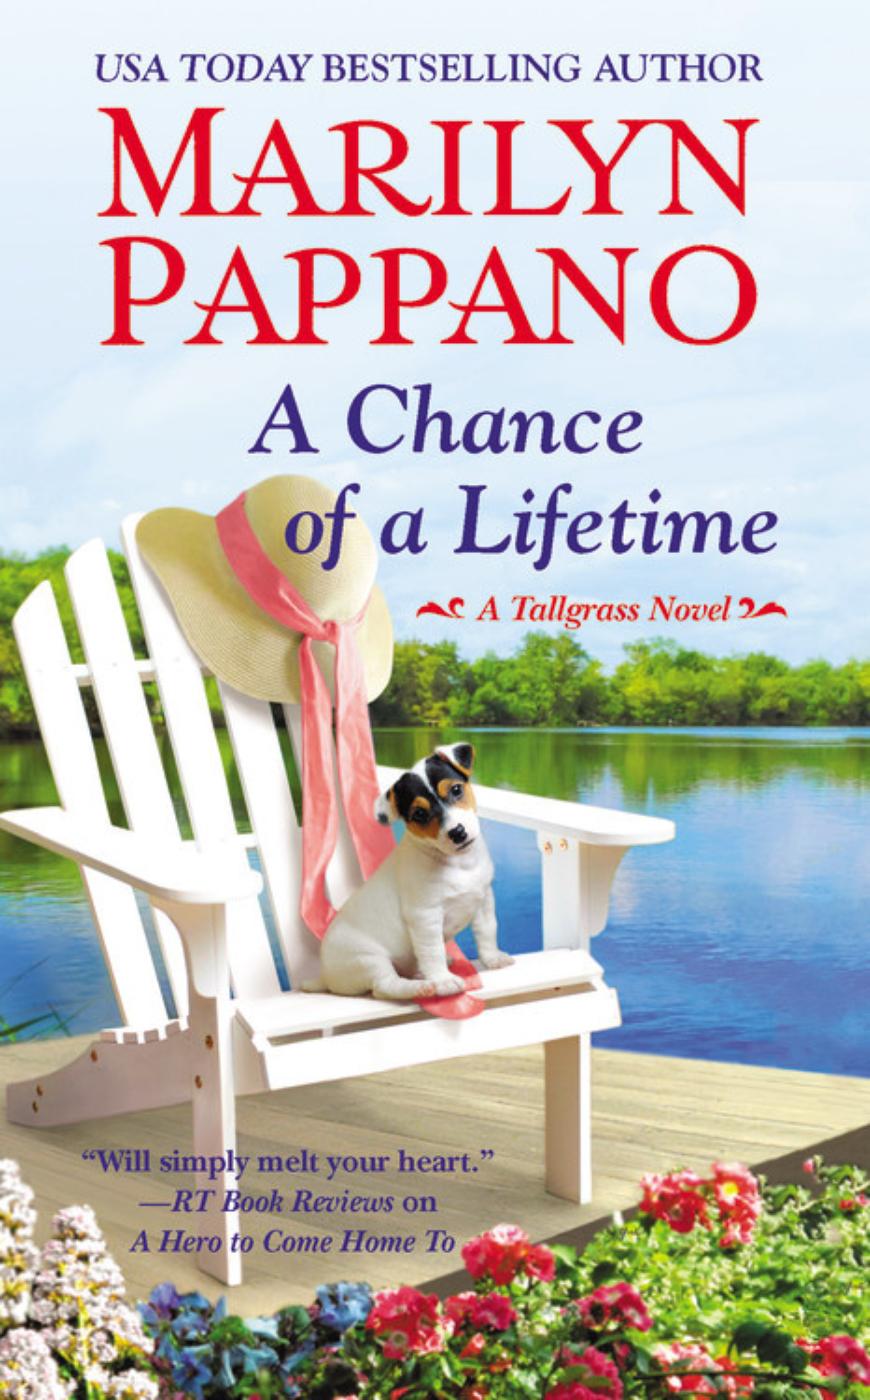 A Chance of a Lifetime (2015) by Marilyn Pappano